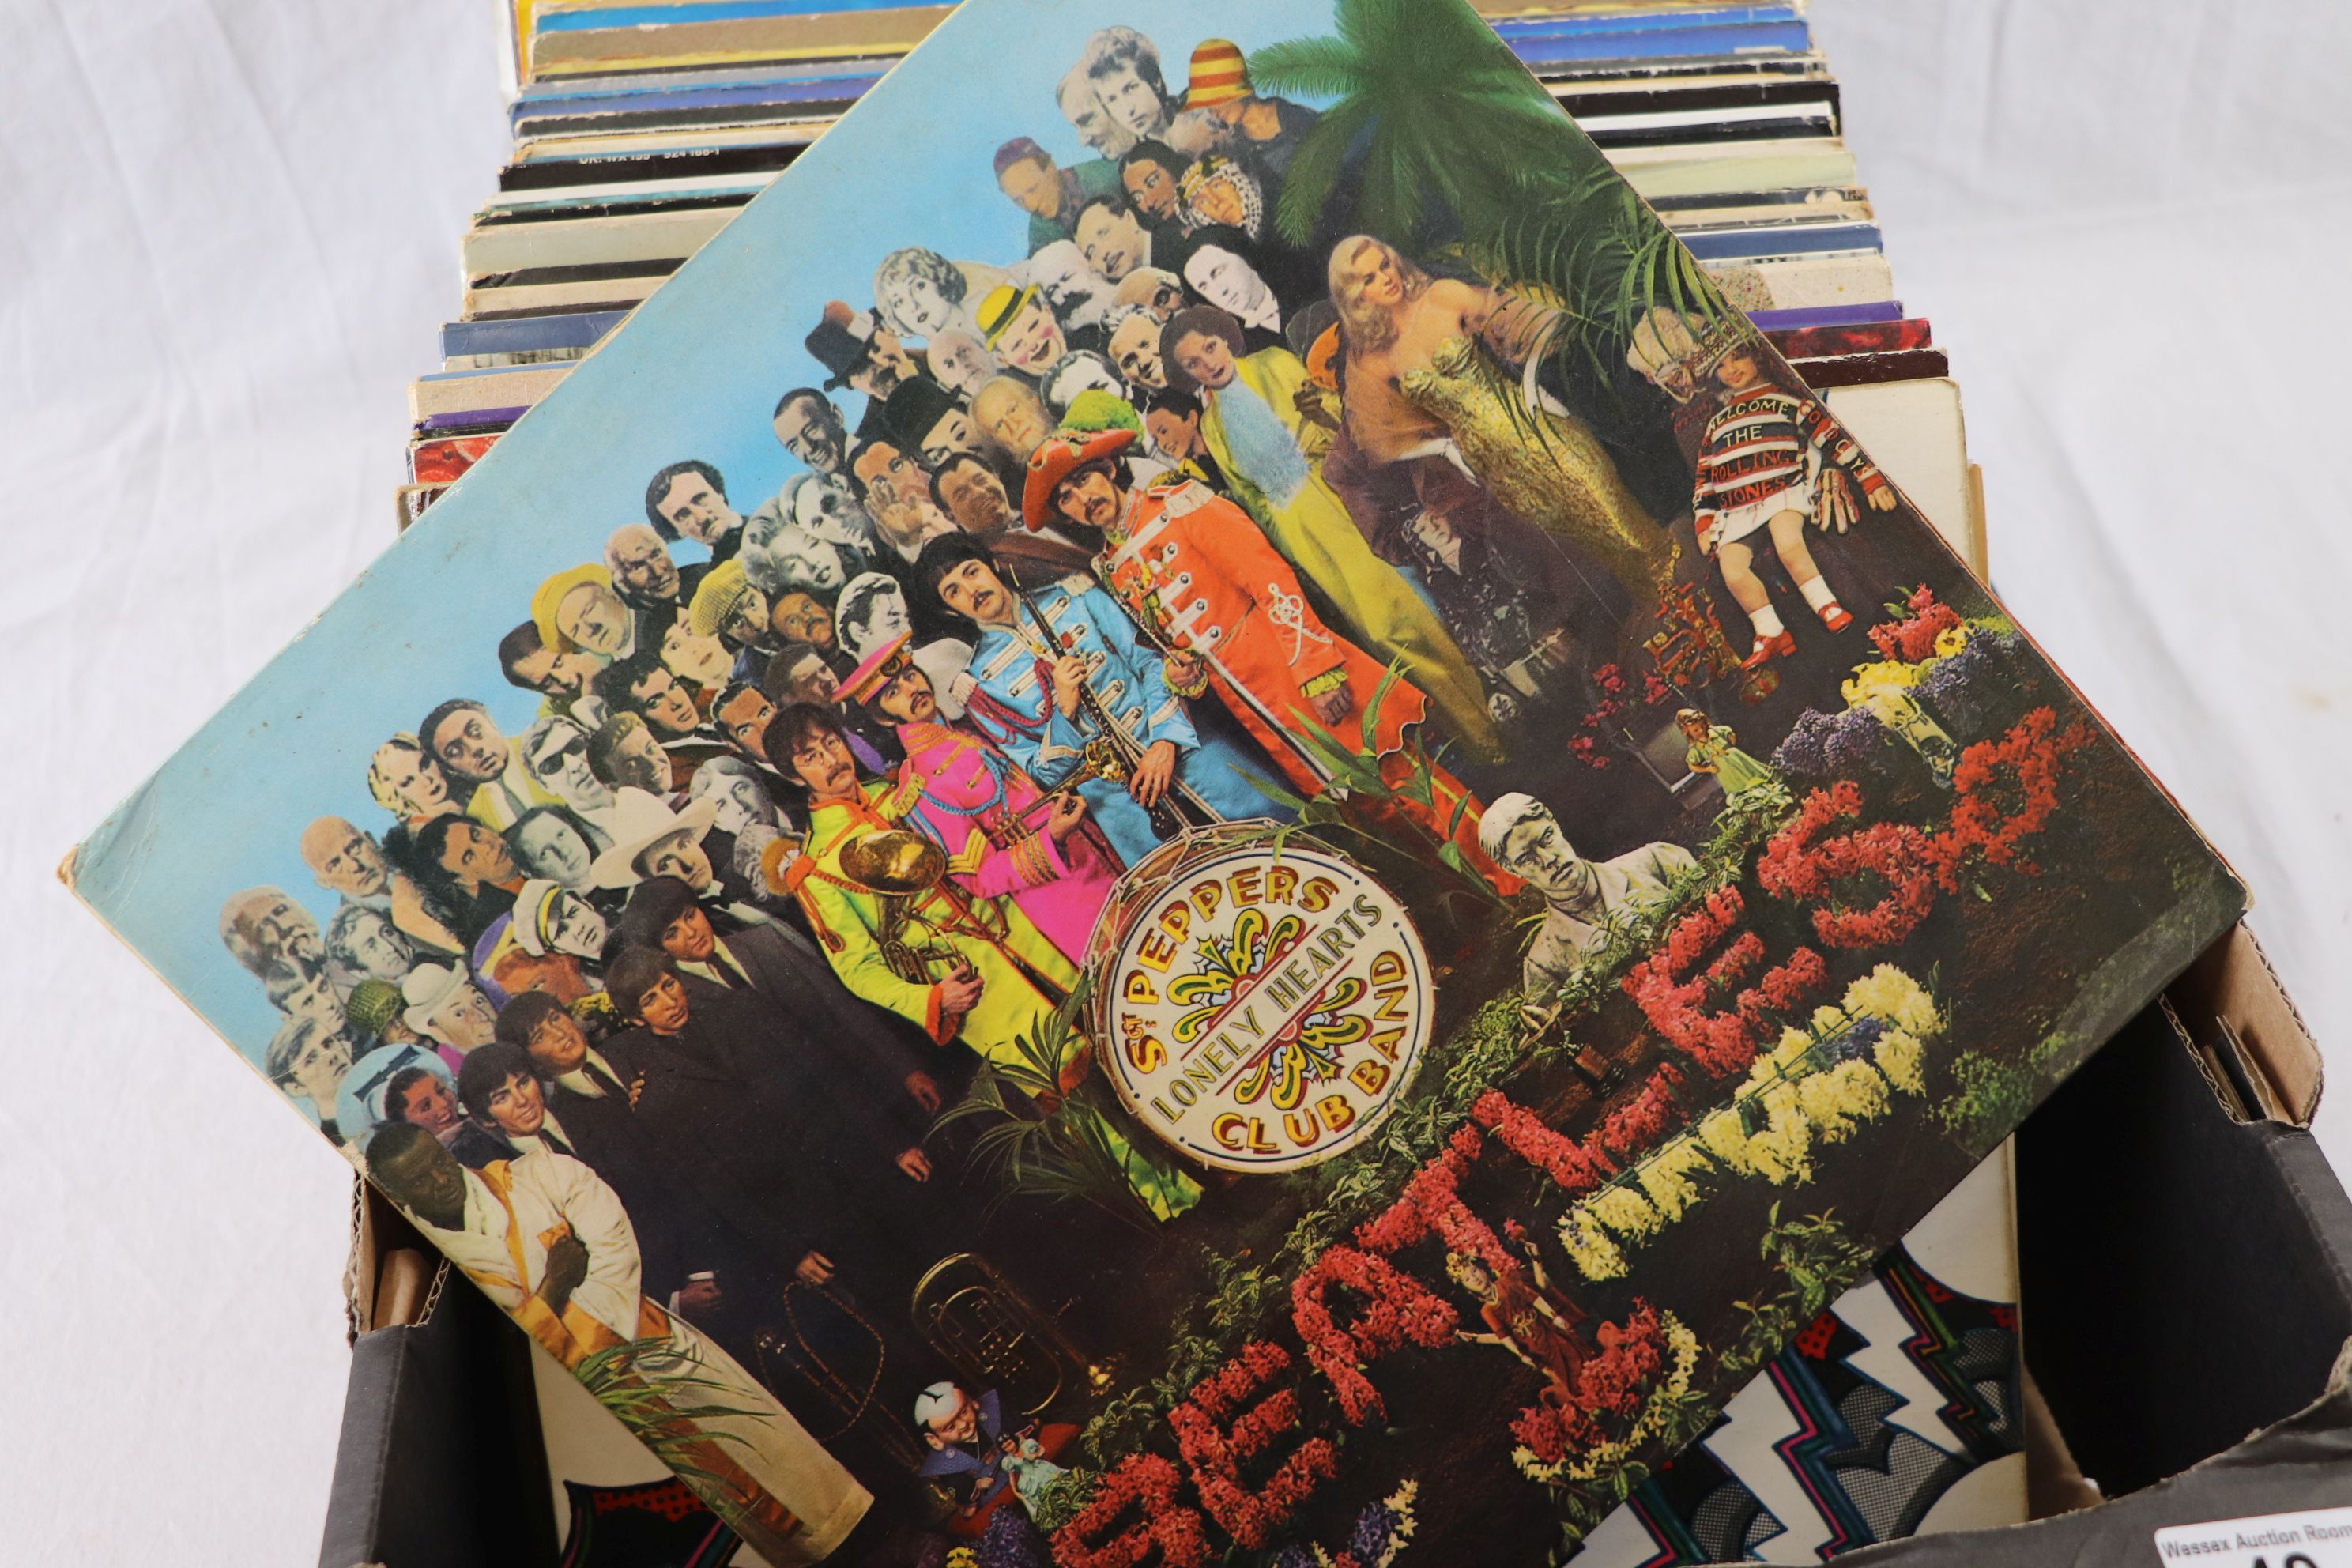 Vinyl - Collection of around 90 Pop & Rock LPs to include Family, The Who, Fleetwood Mac and others, - Image 3 of 7